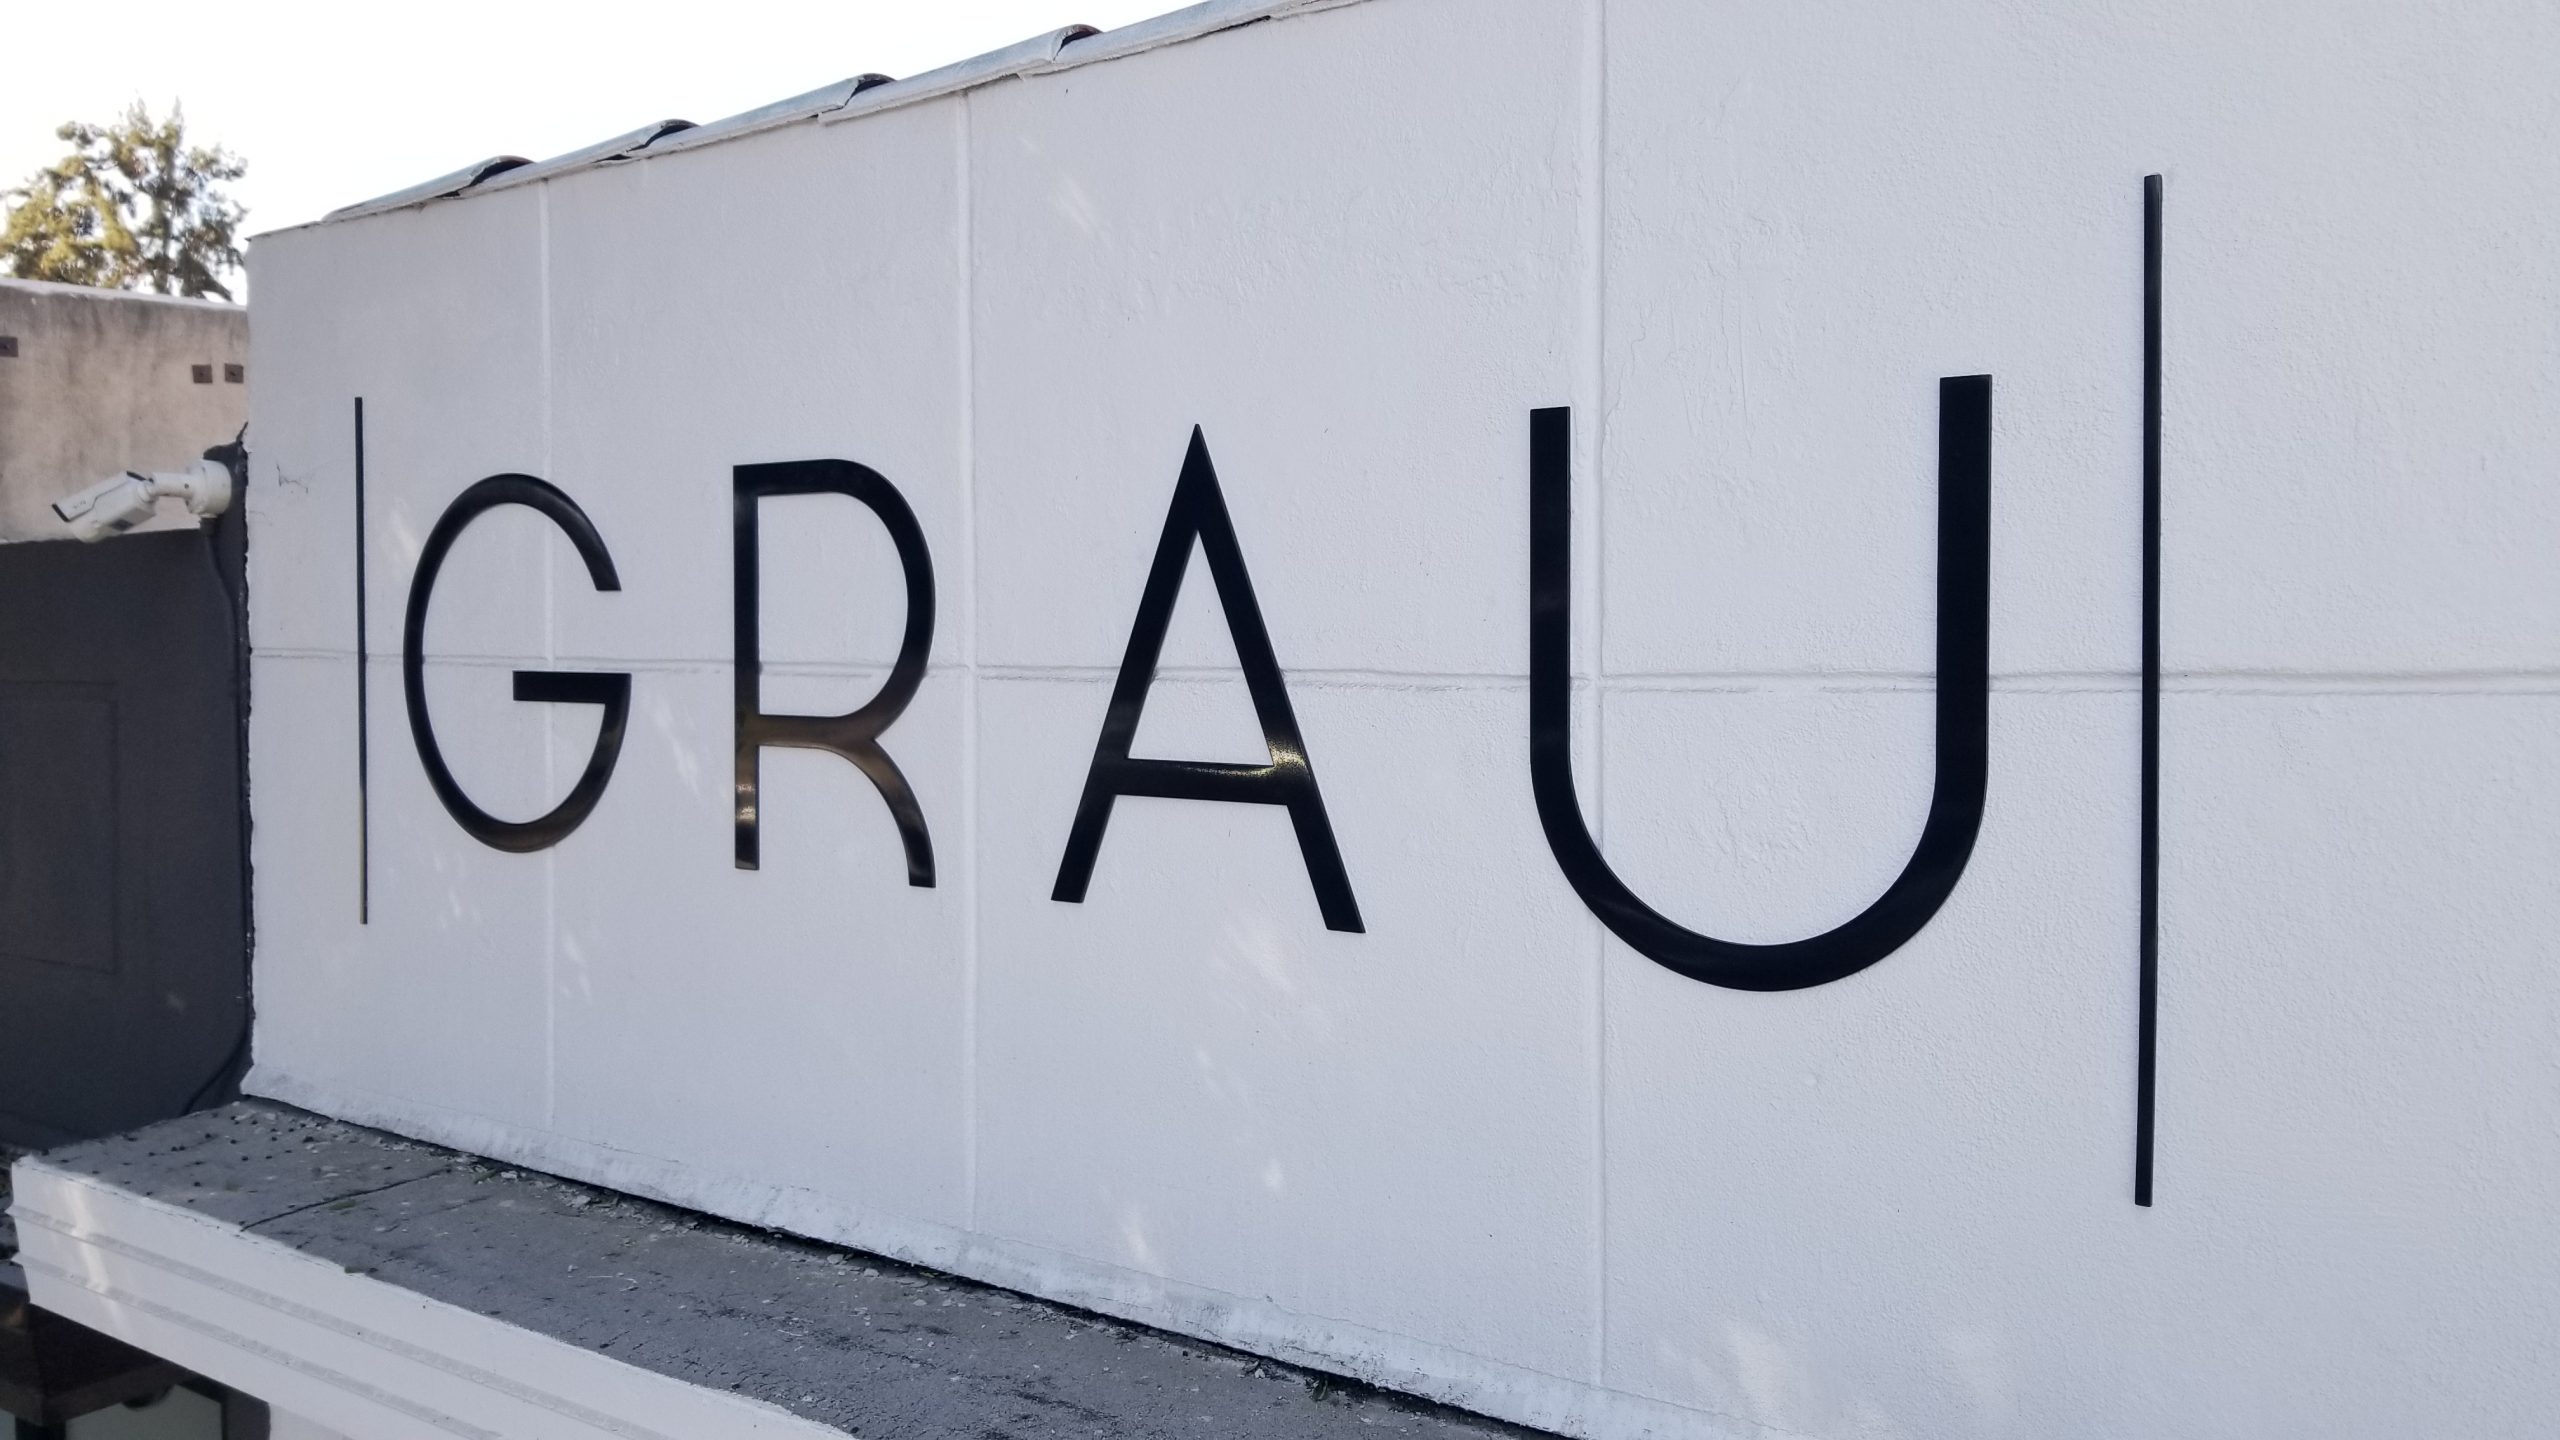 This is the storefront dimensional lettering we fabricated and installed for GRAU Women's Boutique in Burbank.